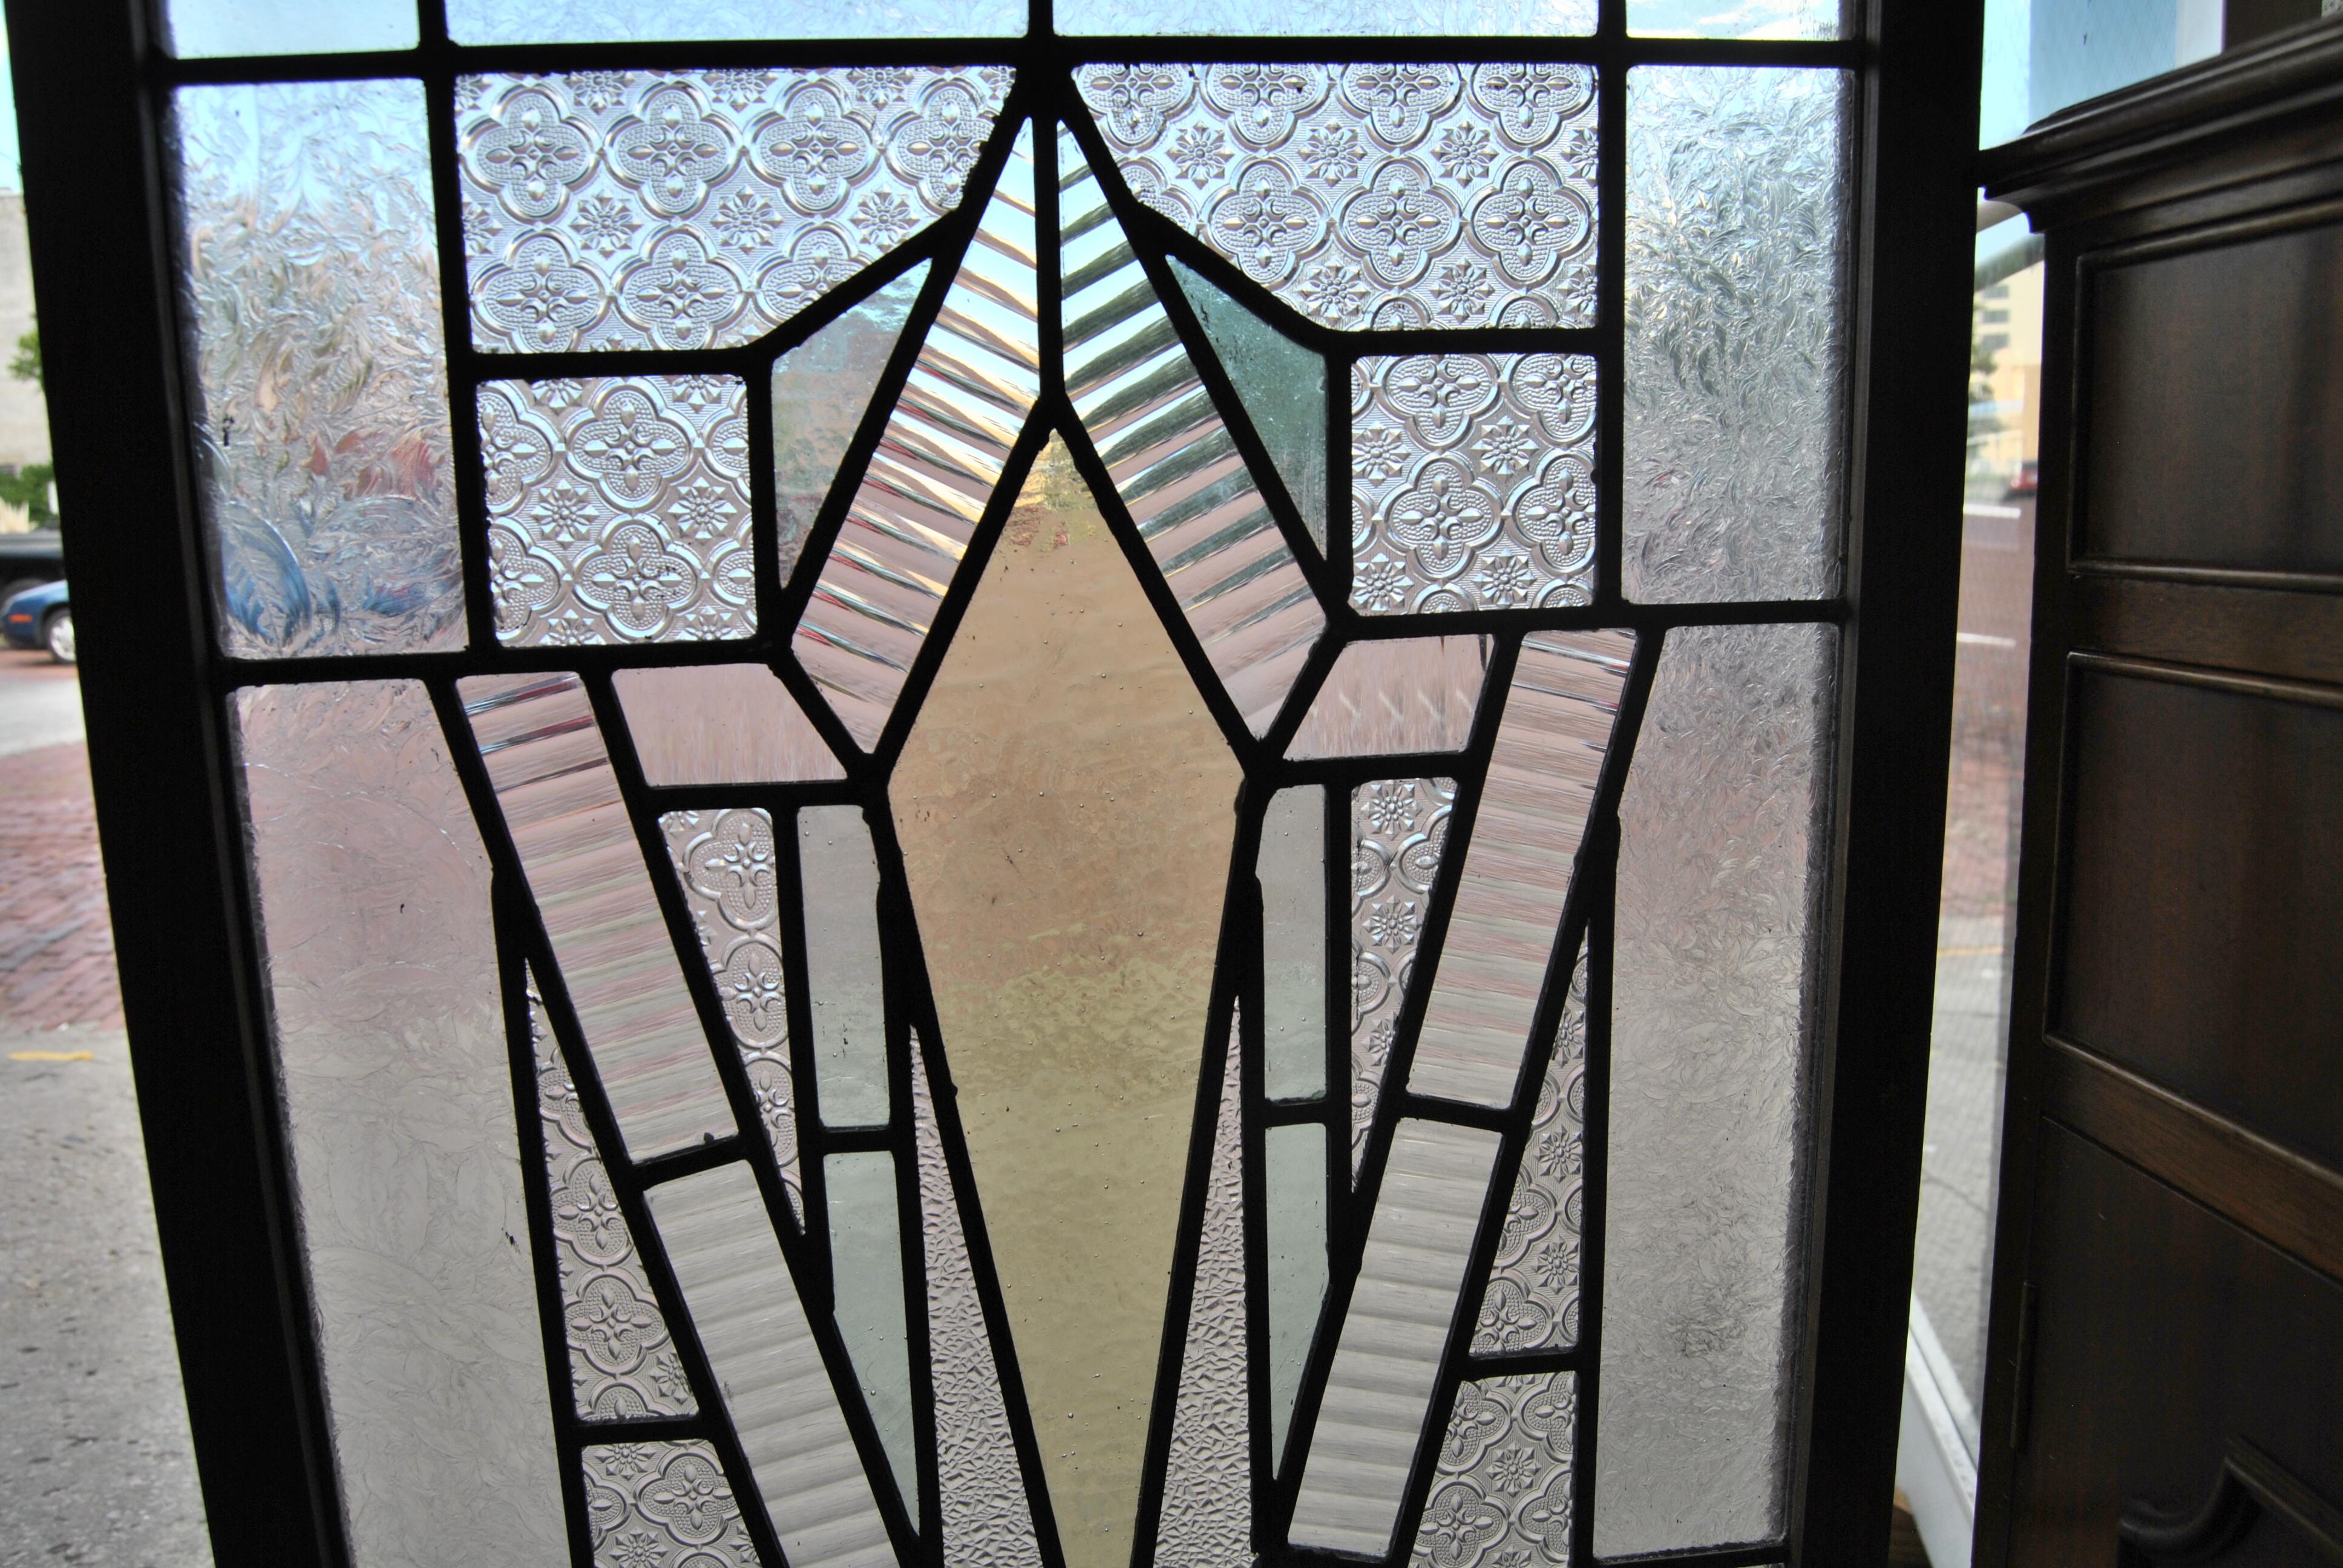 This is a stained glass window made in England, circa 1970. It has a combination of colors being light gold / yellow, light green, blue and clear. The window is done in a wonderful Art Deco style. It is clean and sound with no cracks or breaks. It